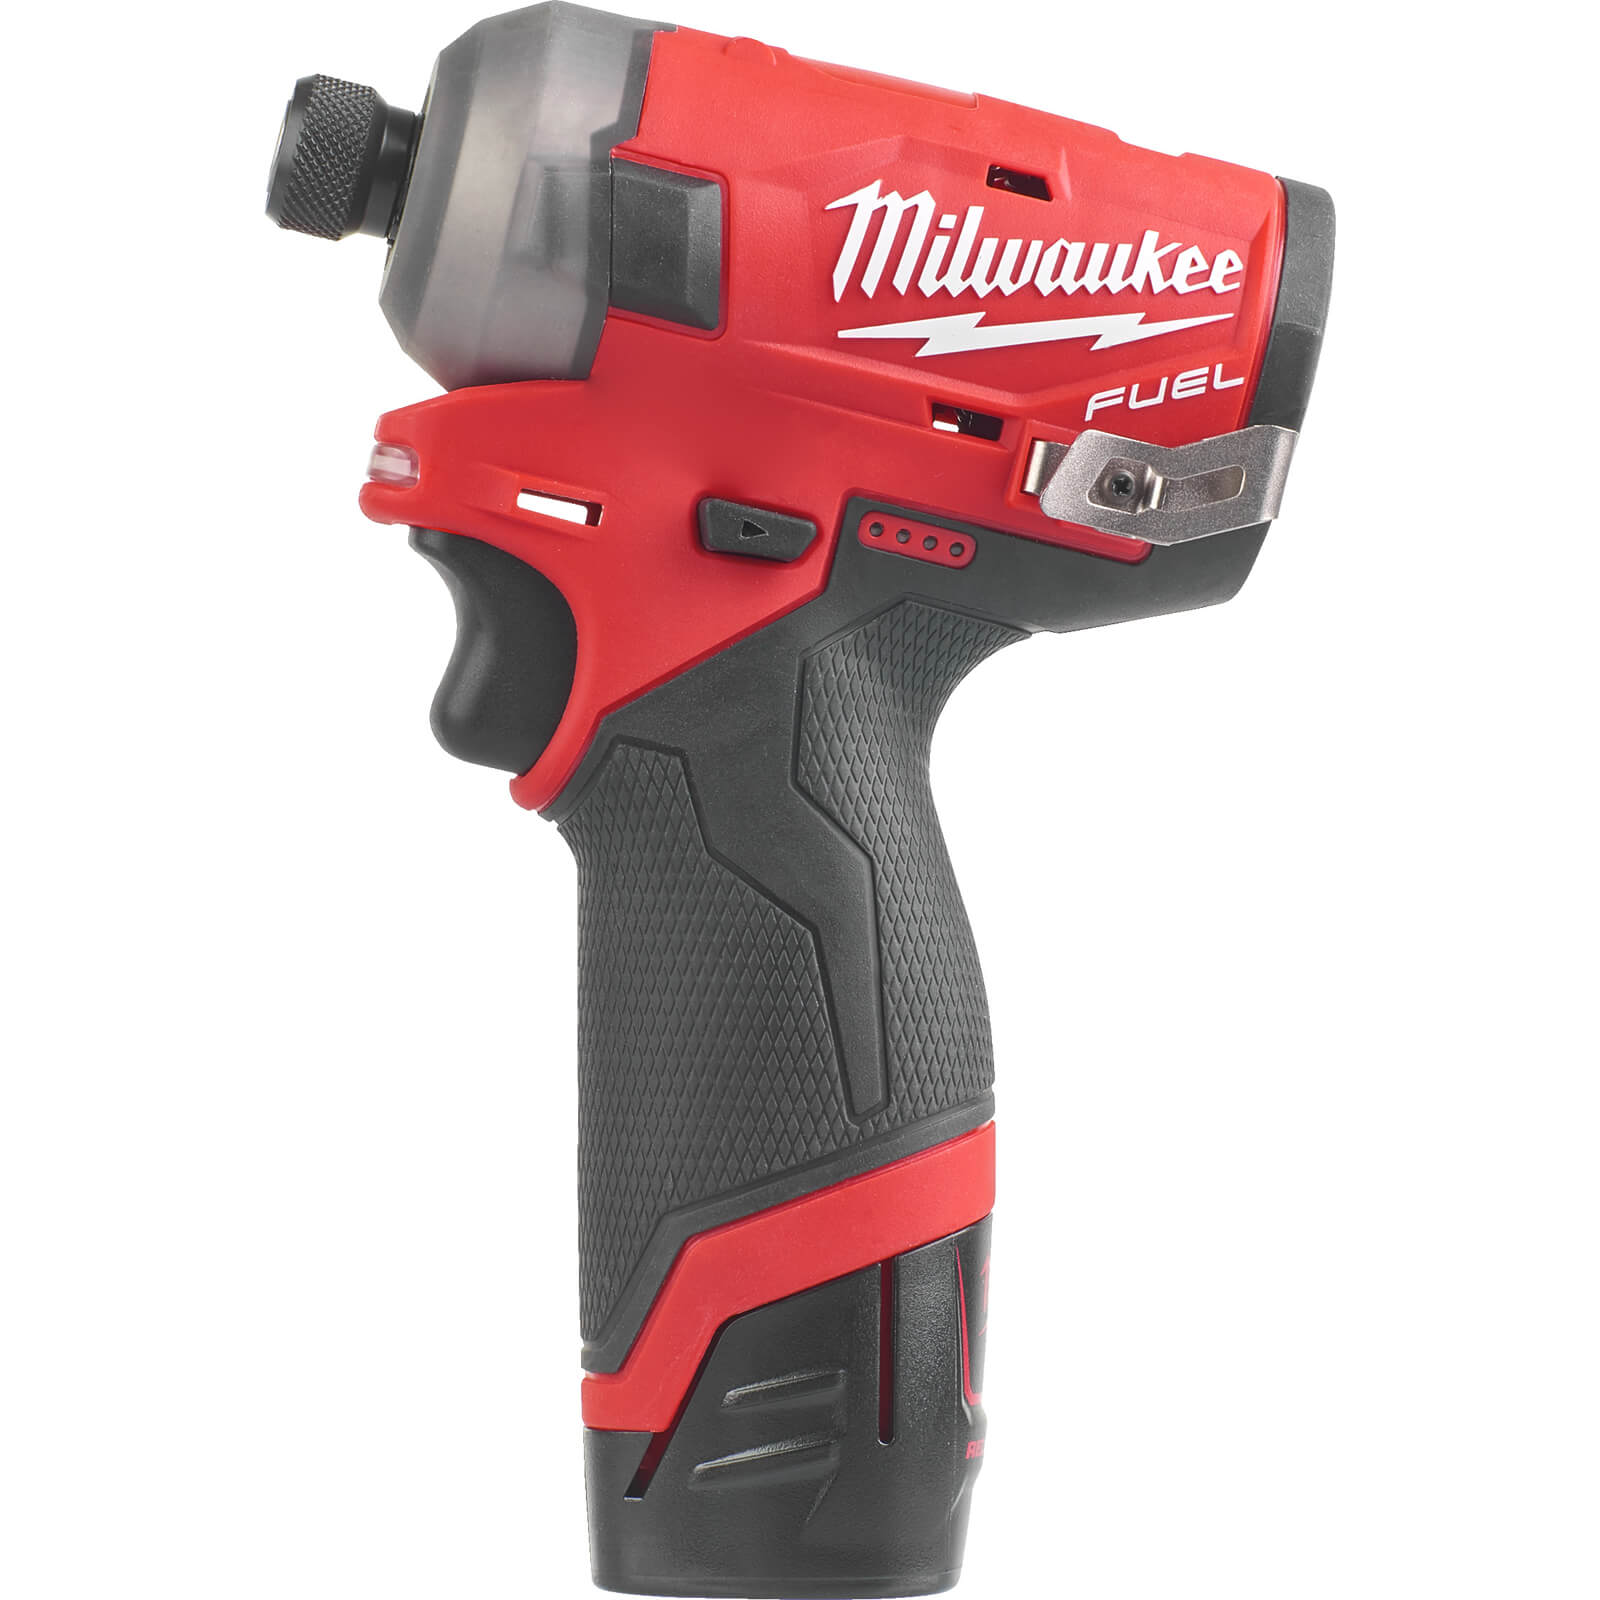 Image of Milwaukee M12 FQID Fuel 12v Cordless Brushless Surge Hydraulic Impact Driver 2 x 2ah Li-ion Charger Case